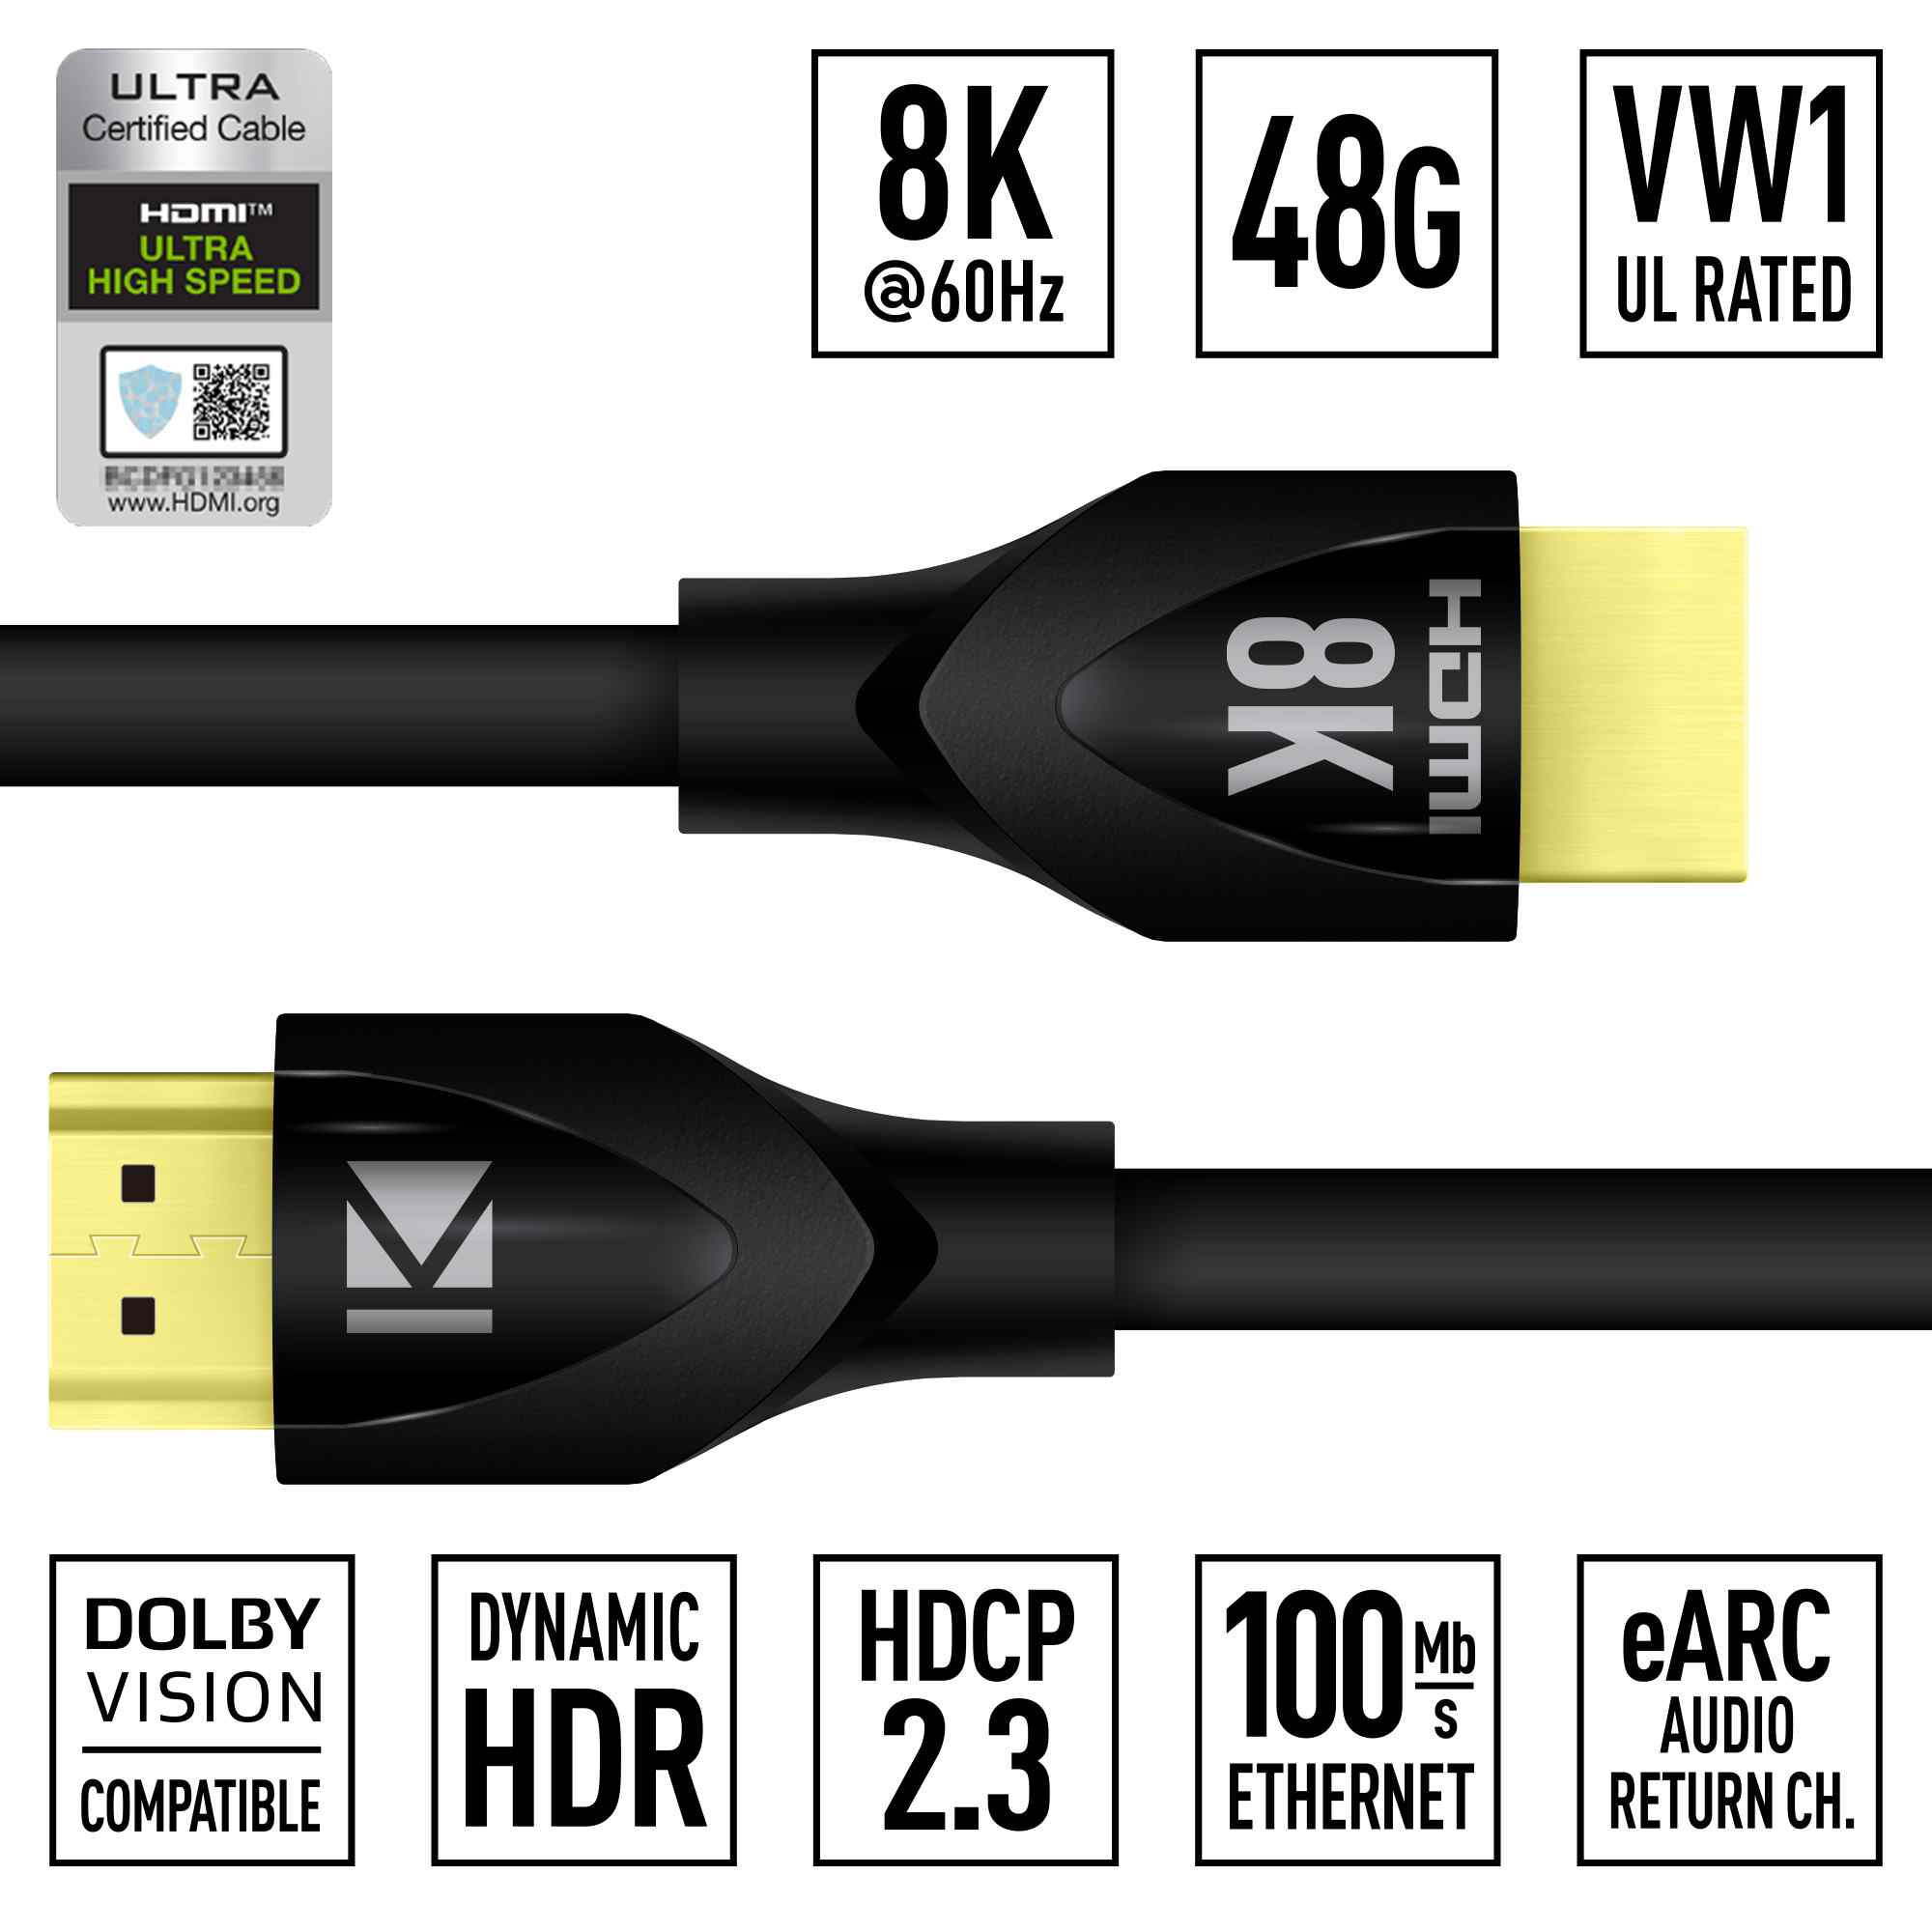 Thumbnail of Key Digital ultra high speed hdmi cable Product image